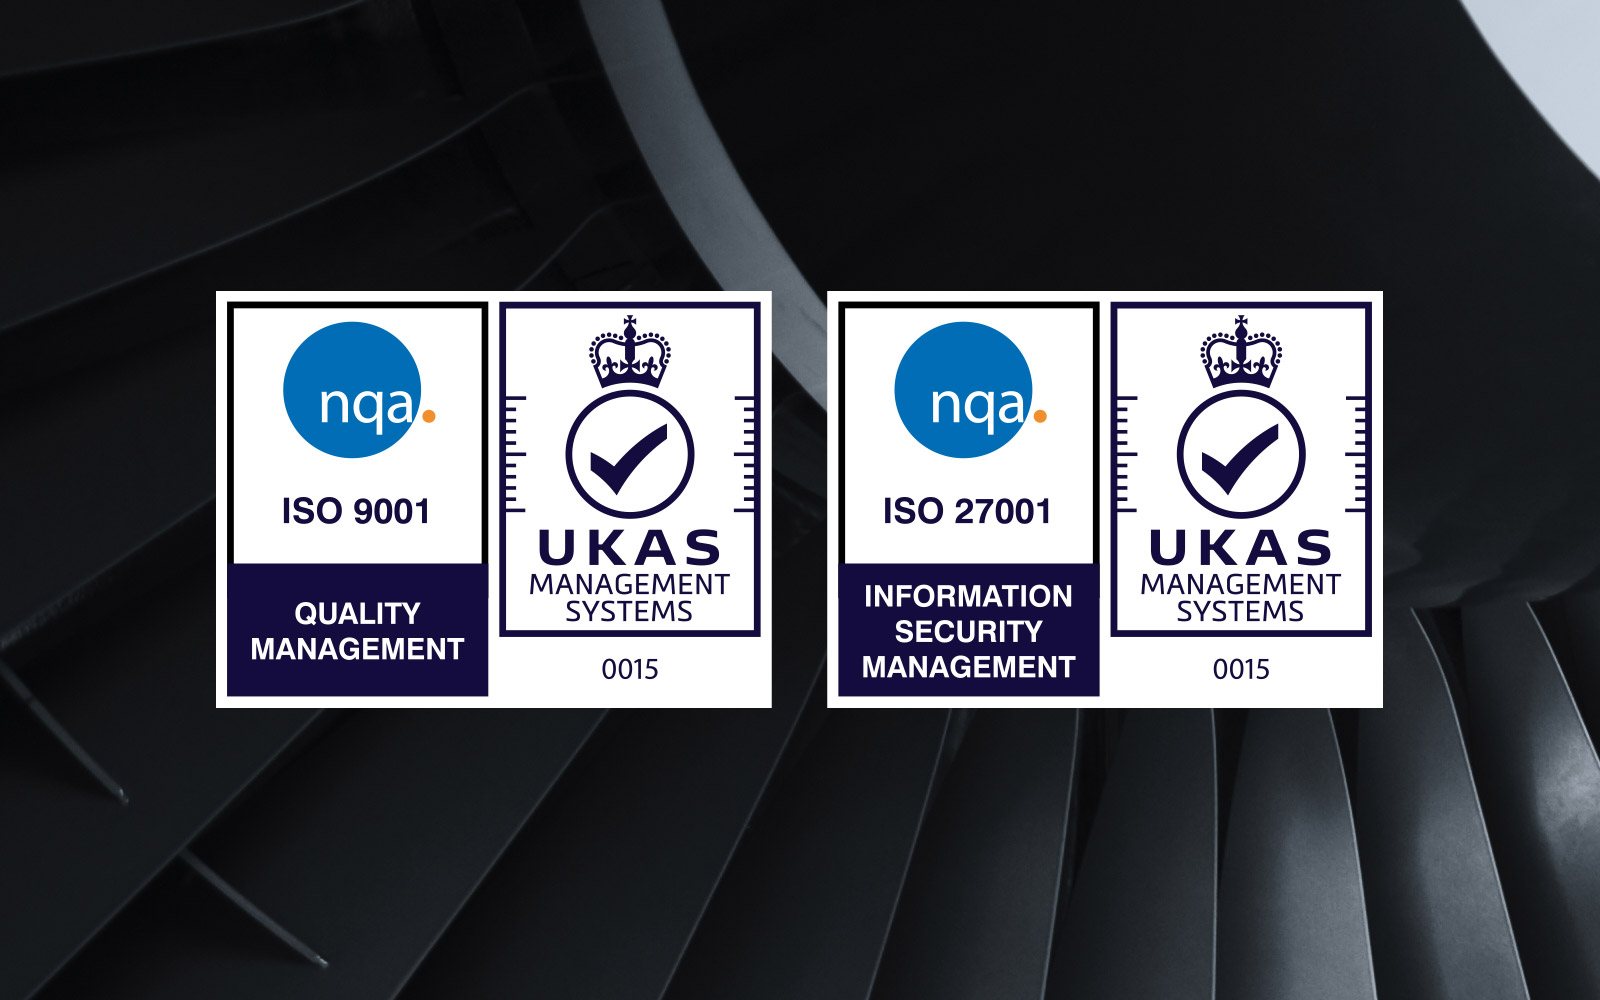 Aerogility showcases safety and security with ISO certifications